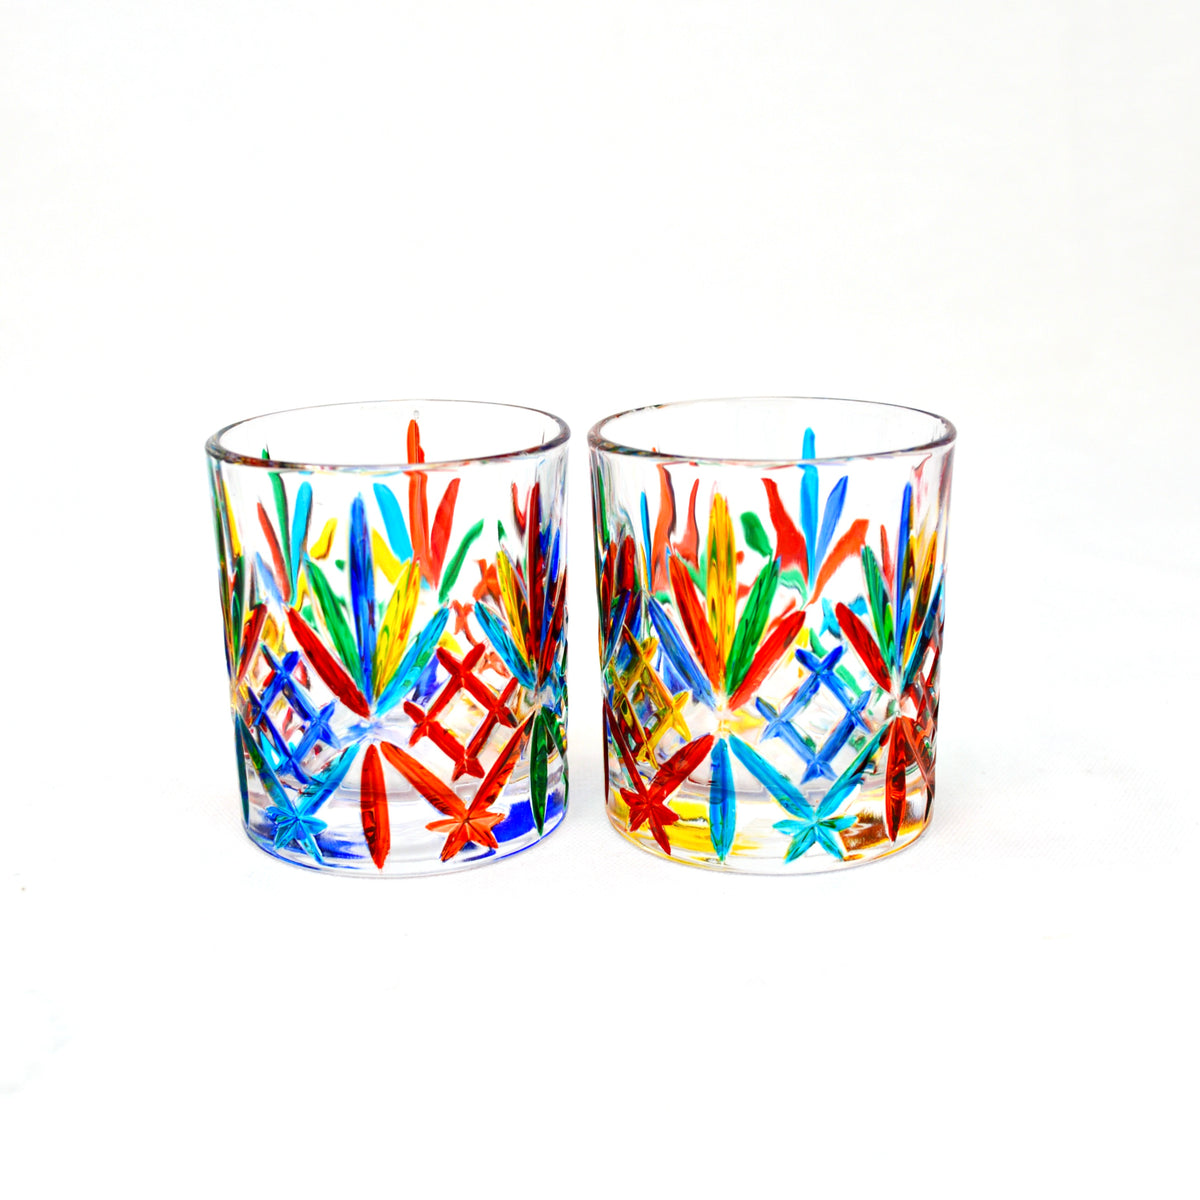 Melodia Shot Glasses, Set of 6, Hand Painted Crystal, Made in Italy - My Italian Decor